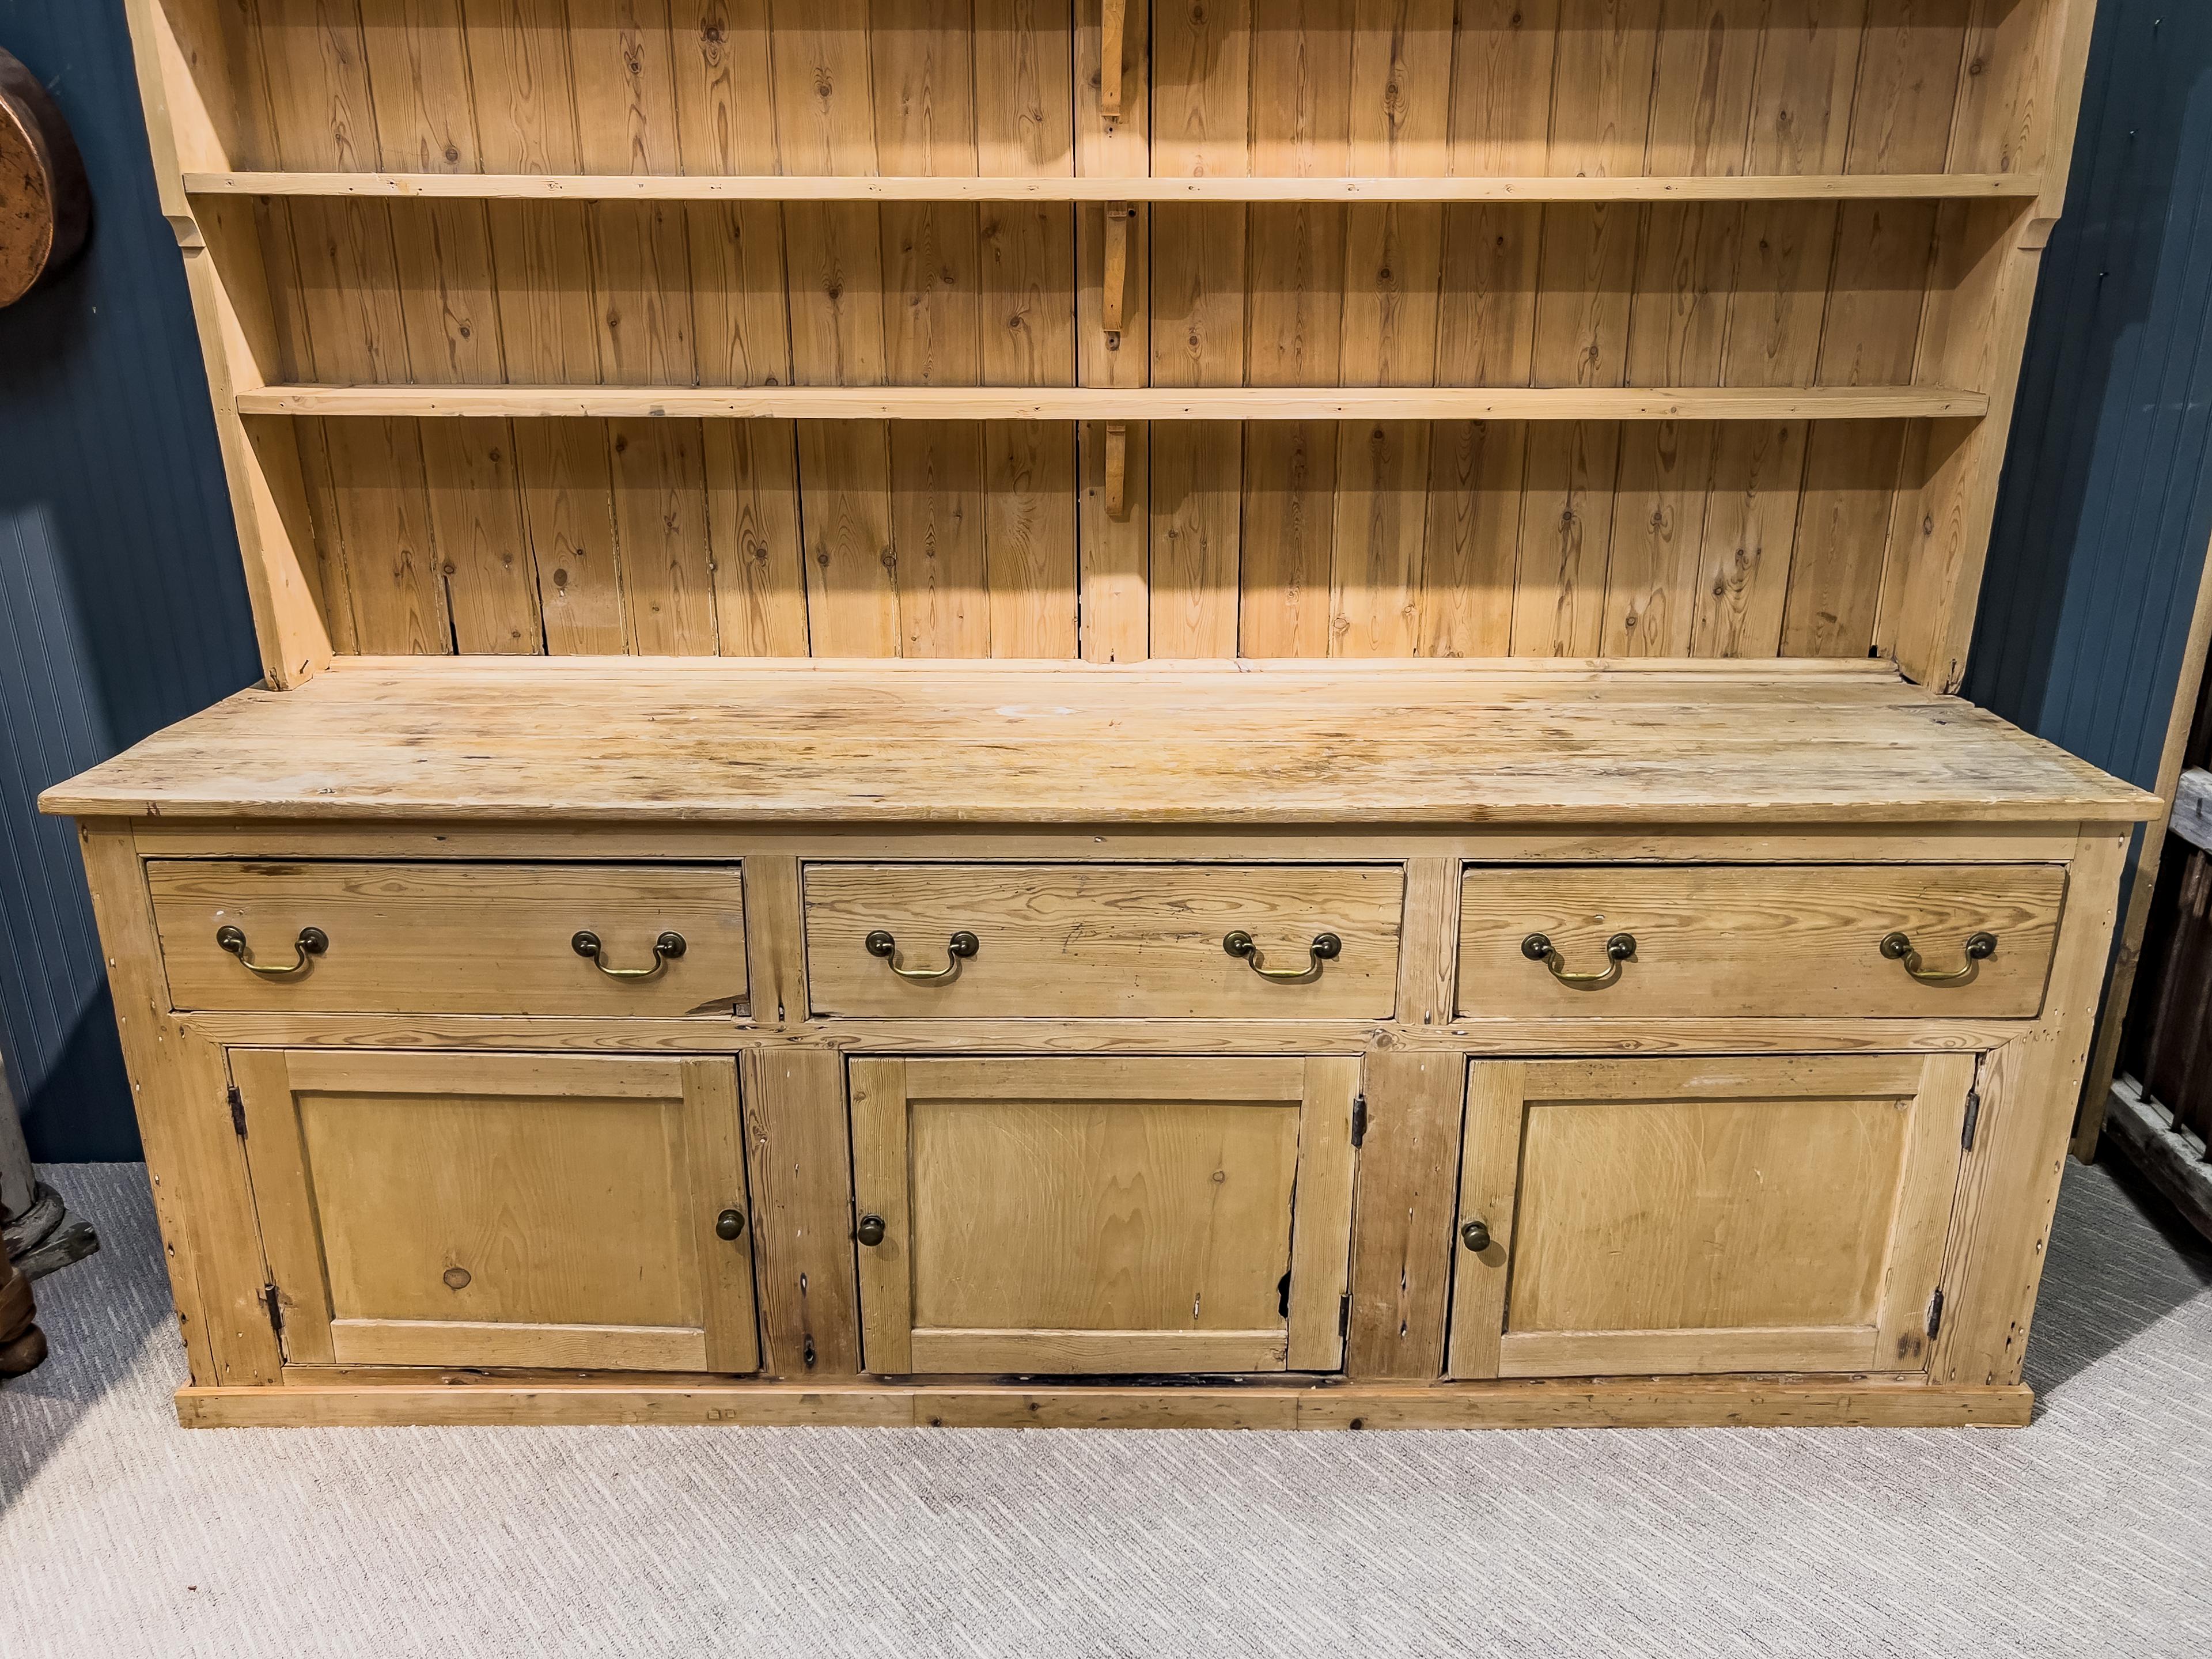 19th c. English pine dresser and Rack is a stately piece with the top portion having three shelves and the bottom having three drawers and three cabinet doors. This piece has a very large stature as it is 92 inches high and 100 inches wide.